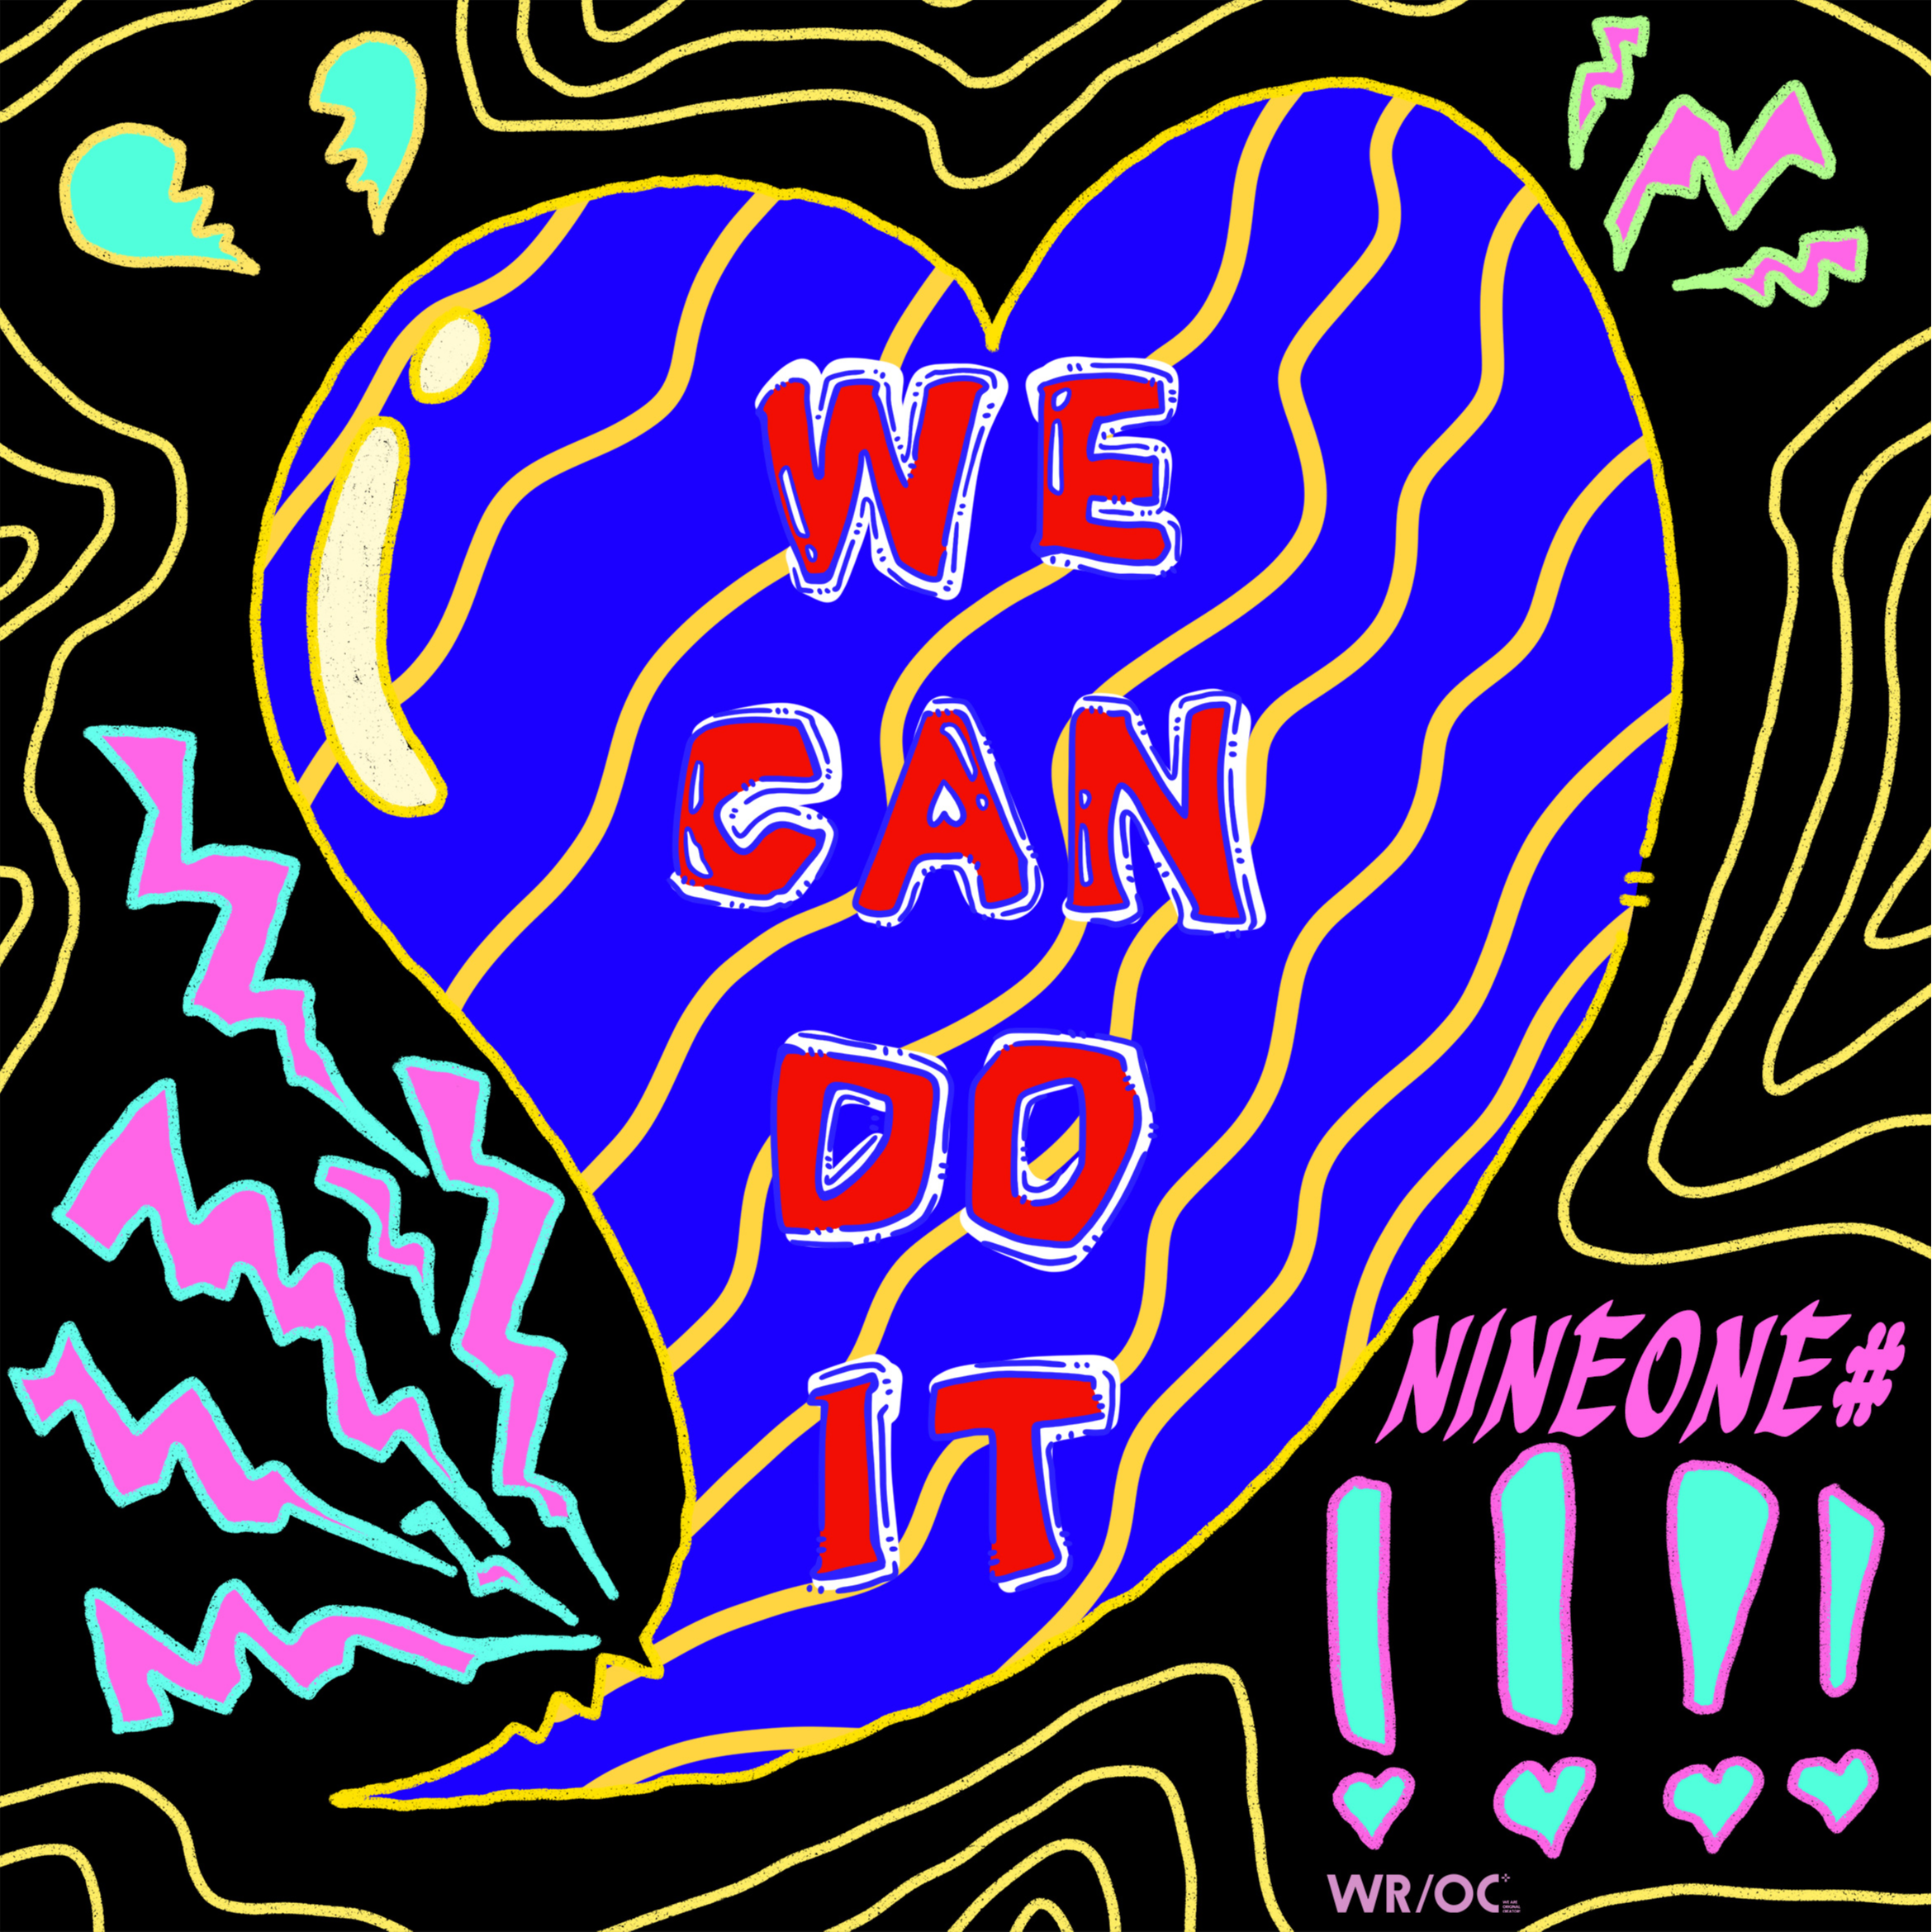 NINEONE#《We Can Do It》[FLAC/MP3-320K]